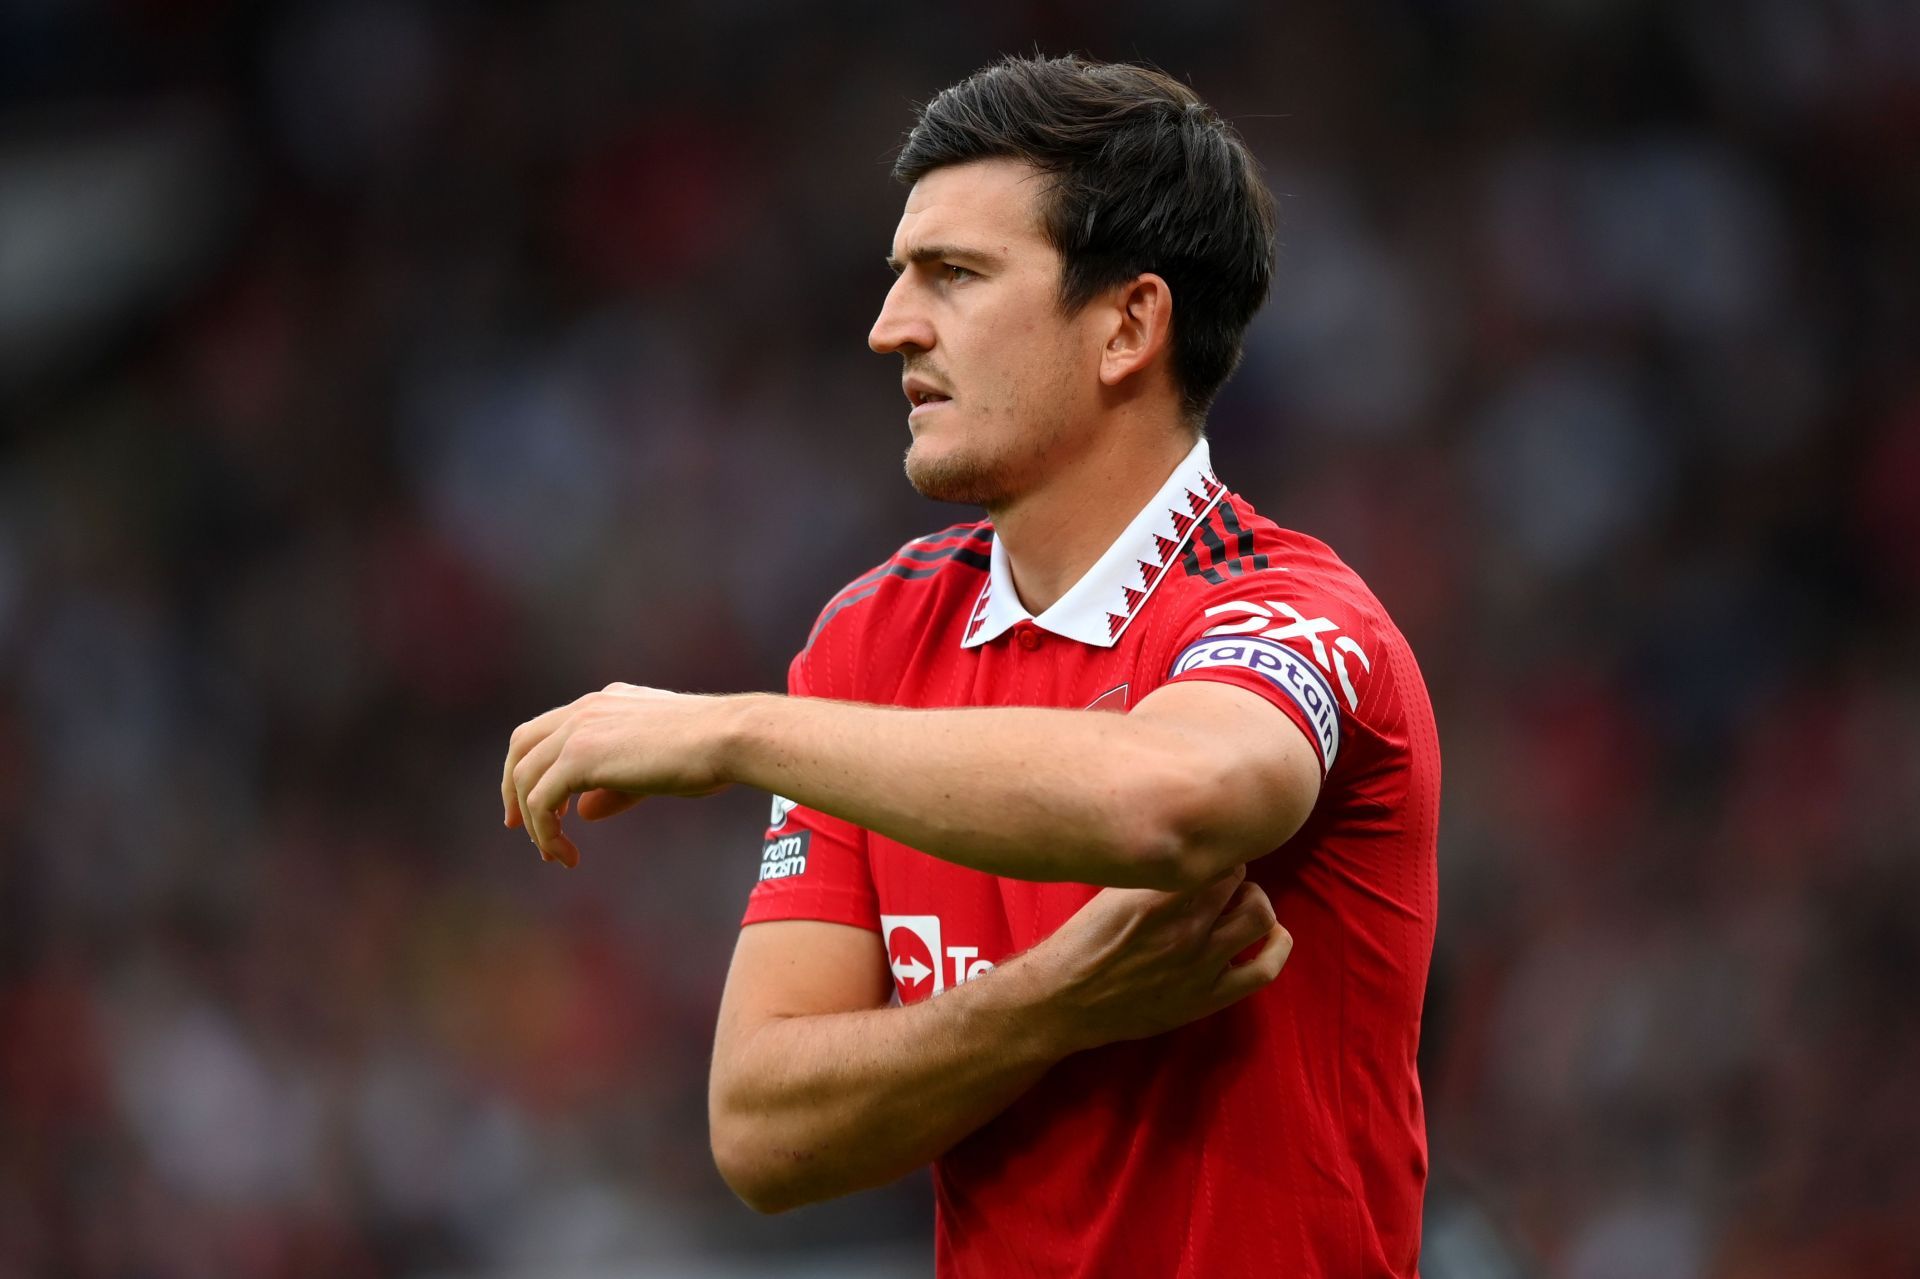   Maguire has struggled for form